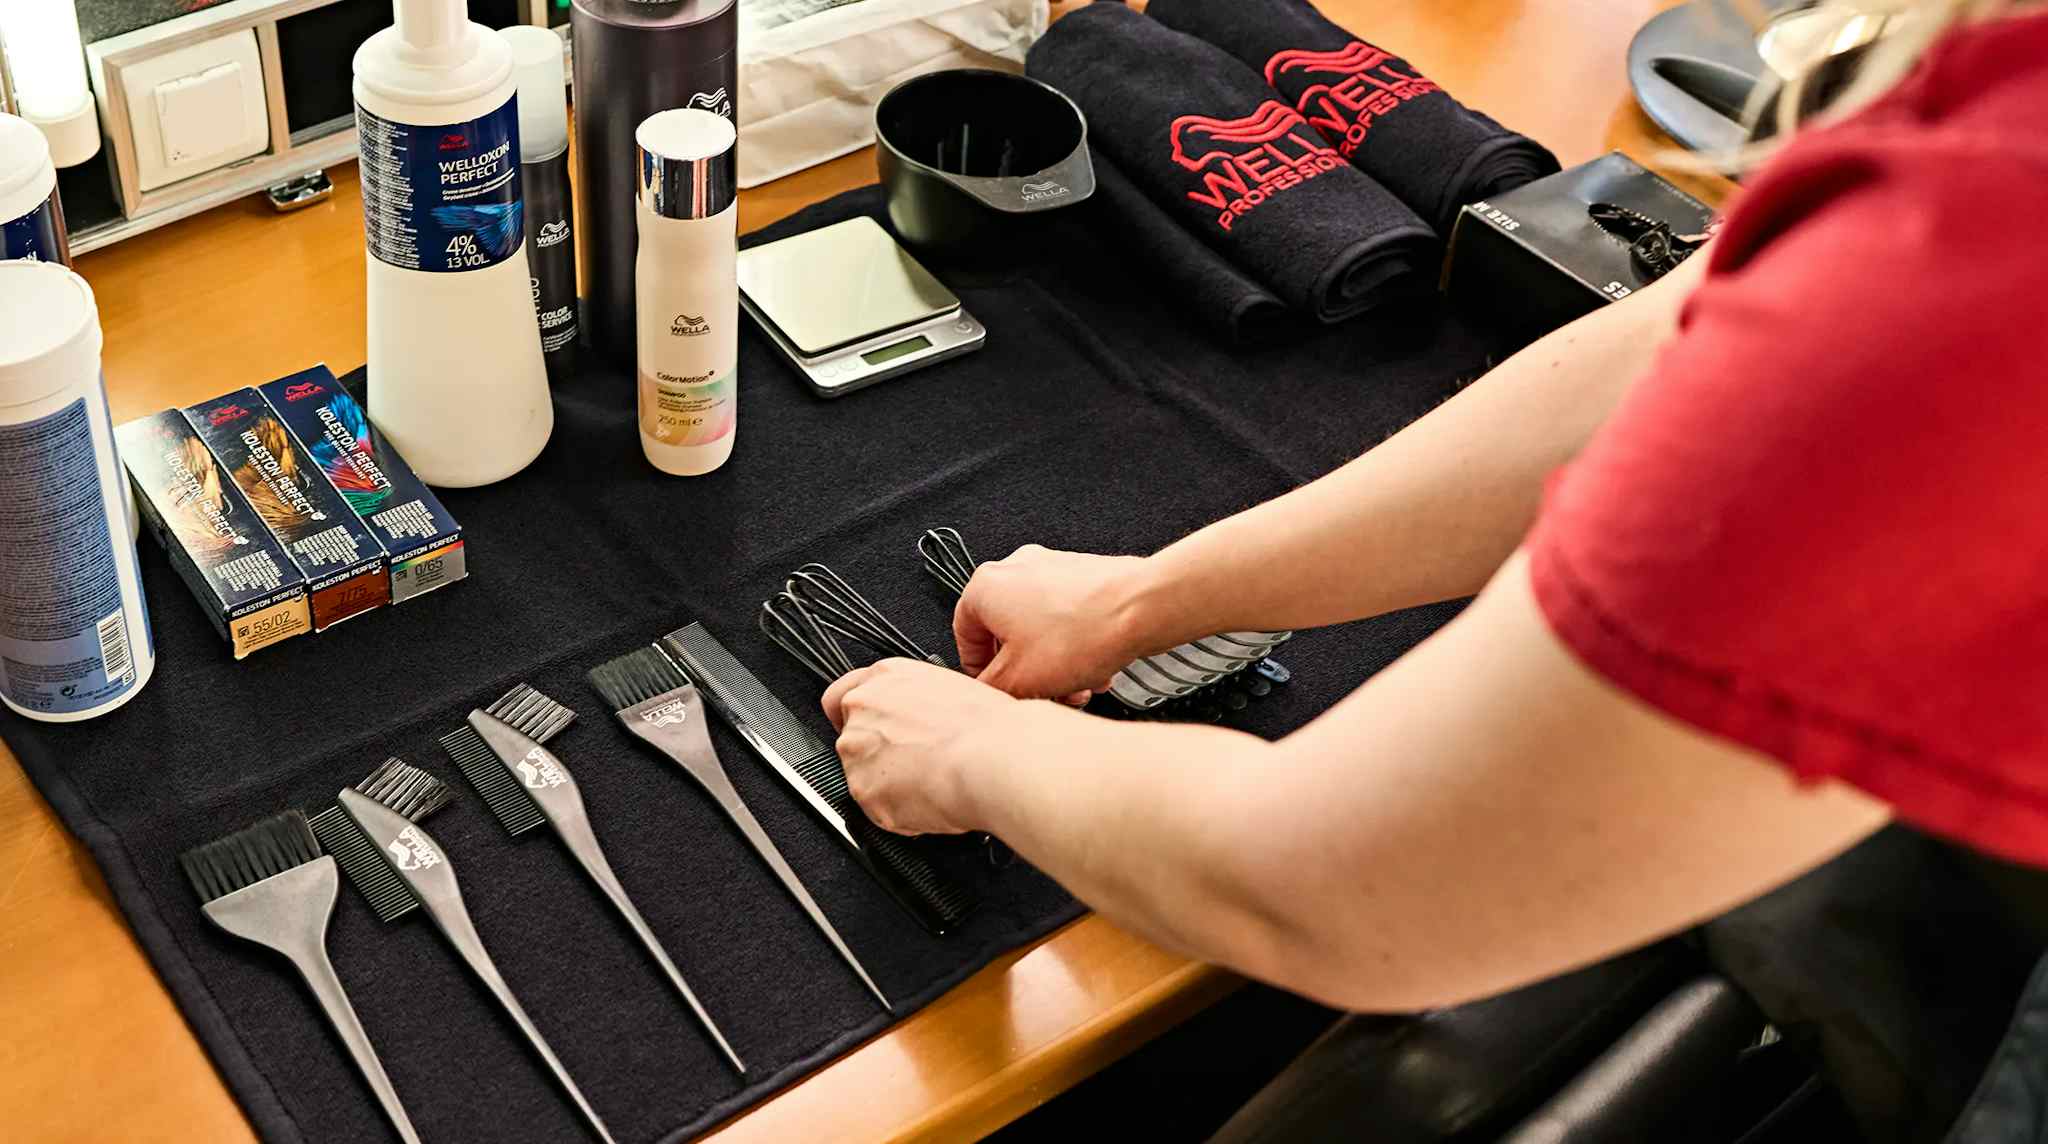 Table filled with high quality hairdressing accessories of Wella Professionals